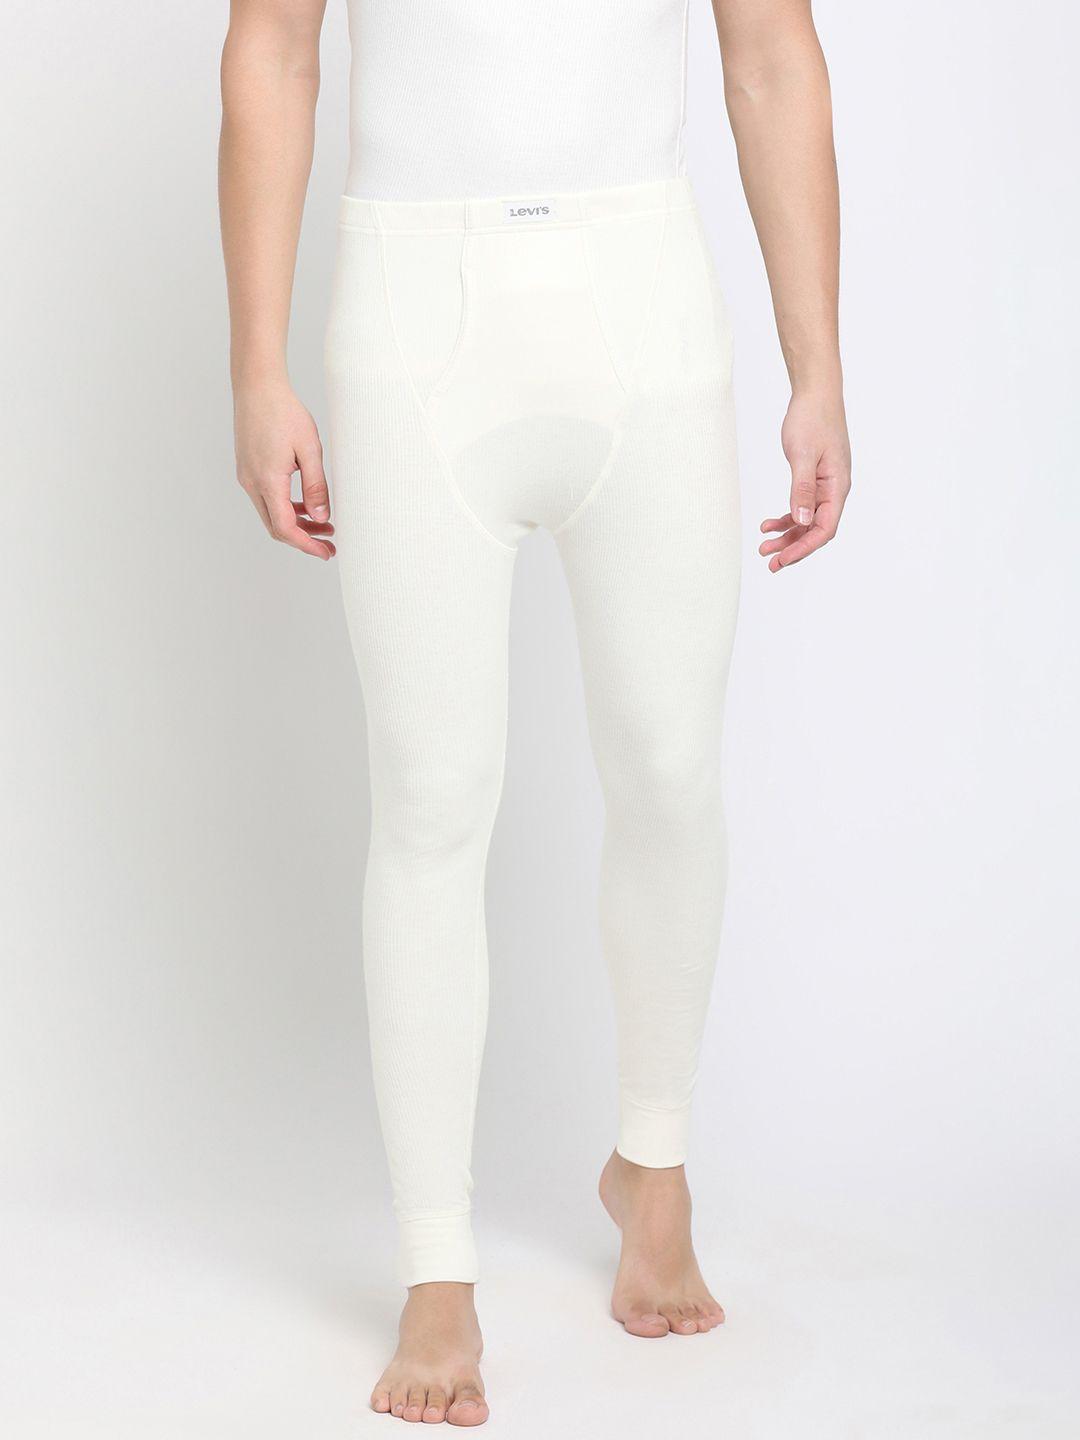 levis men off-white solid thermal bottoms